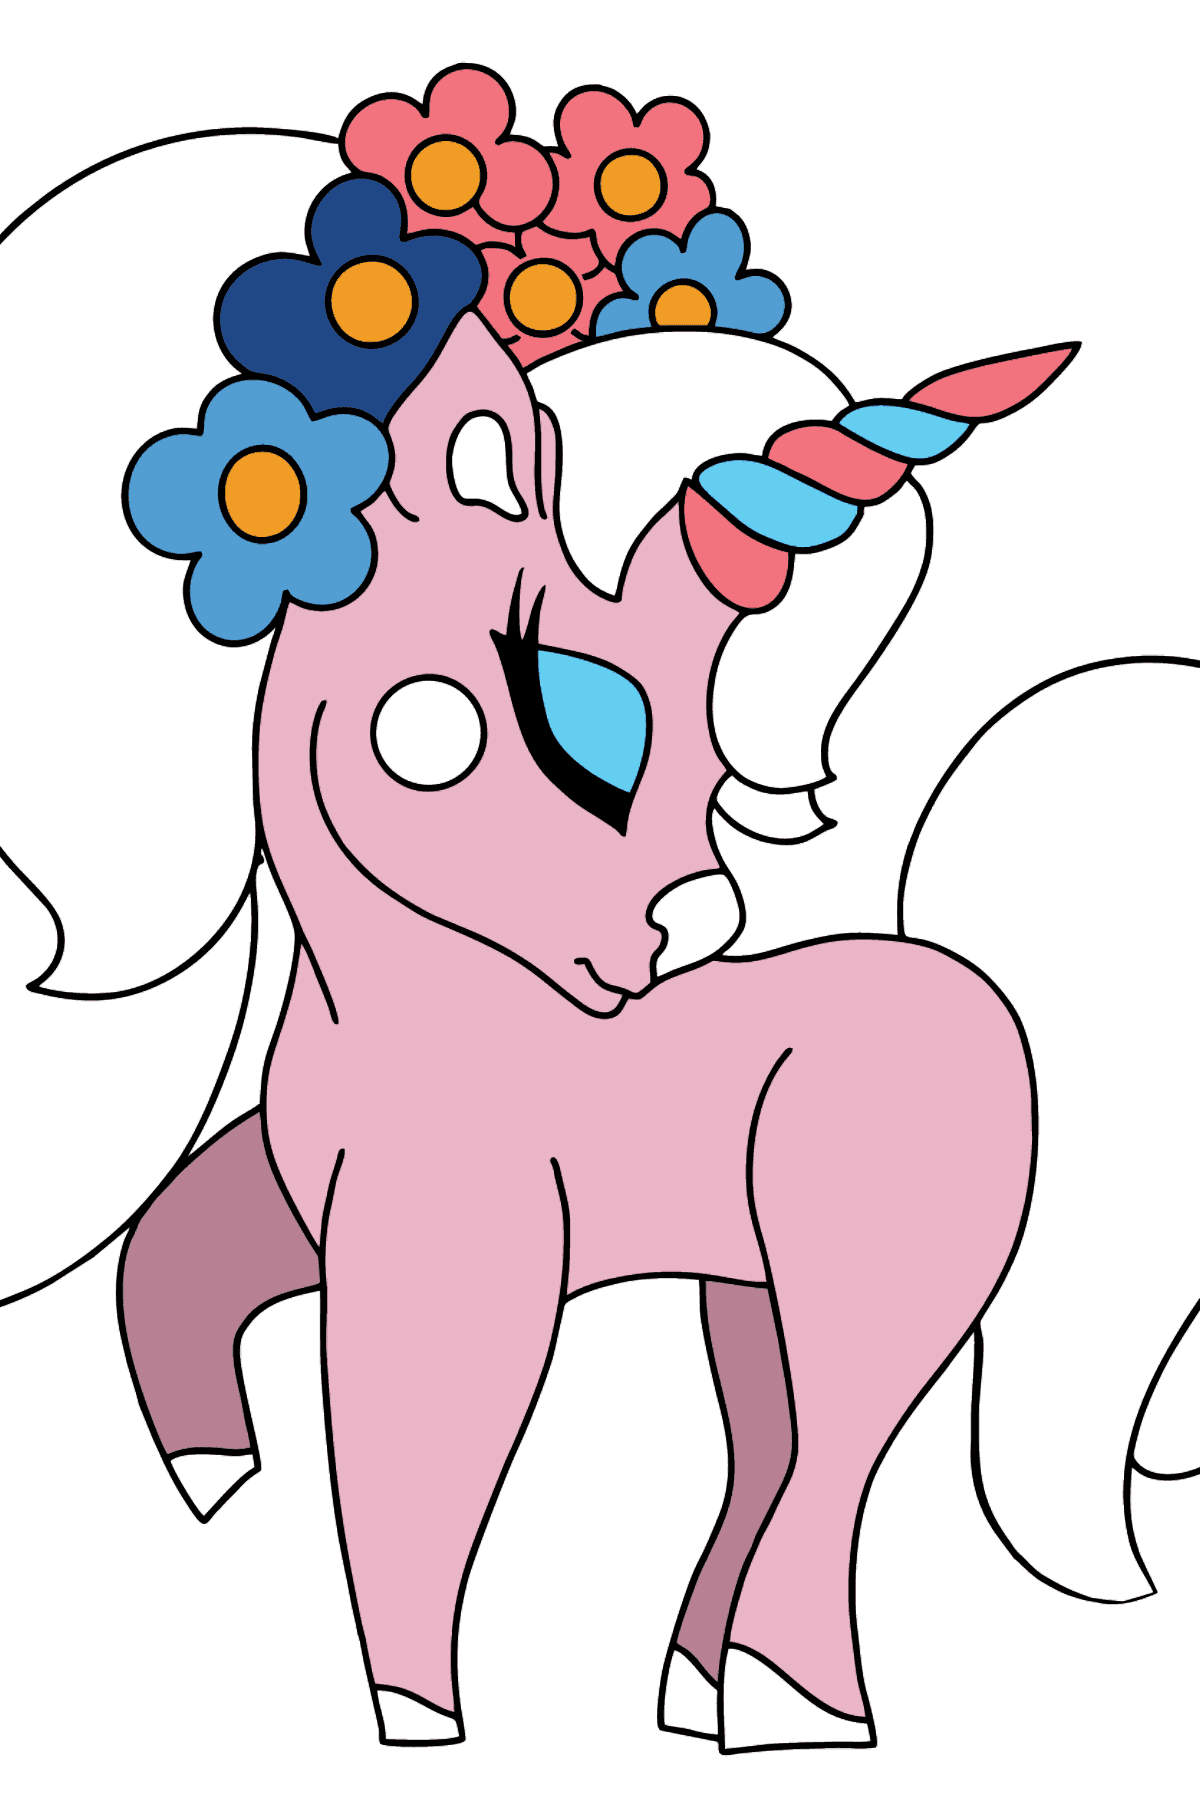 Unicorn in Dreams coloring page - Coloring Pages for Kids